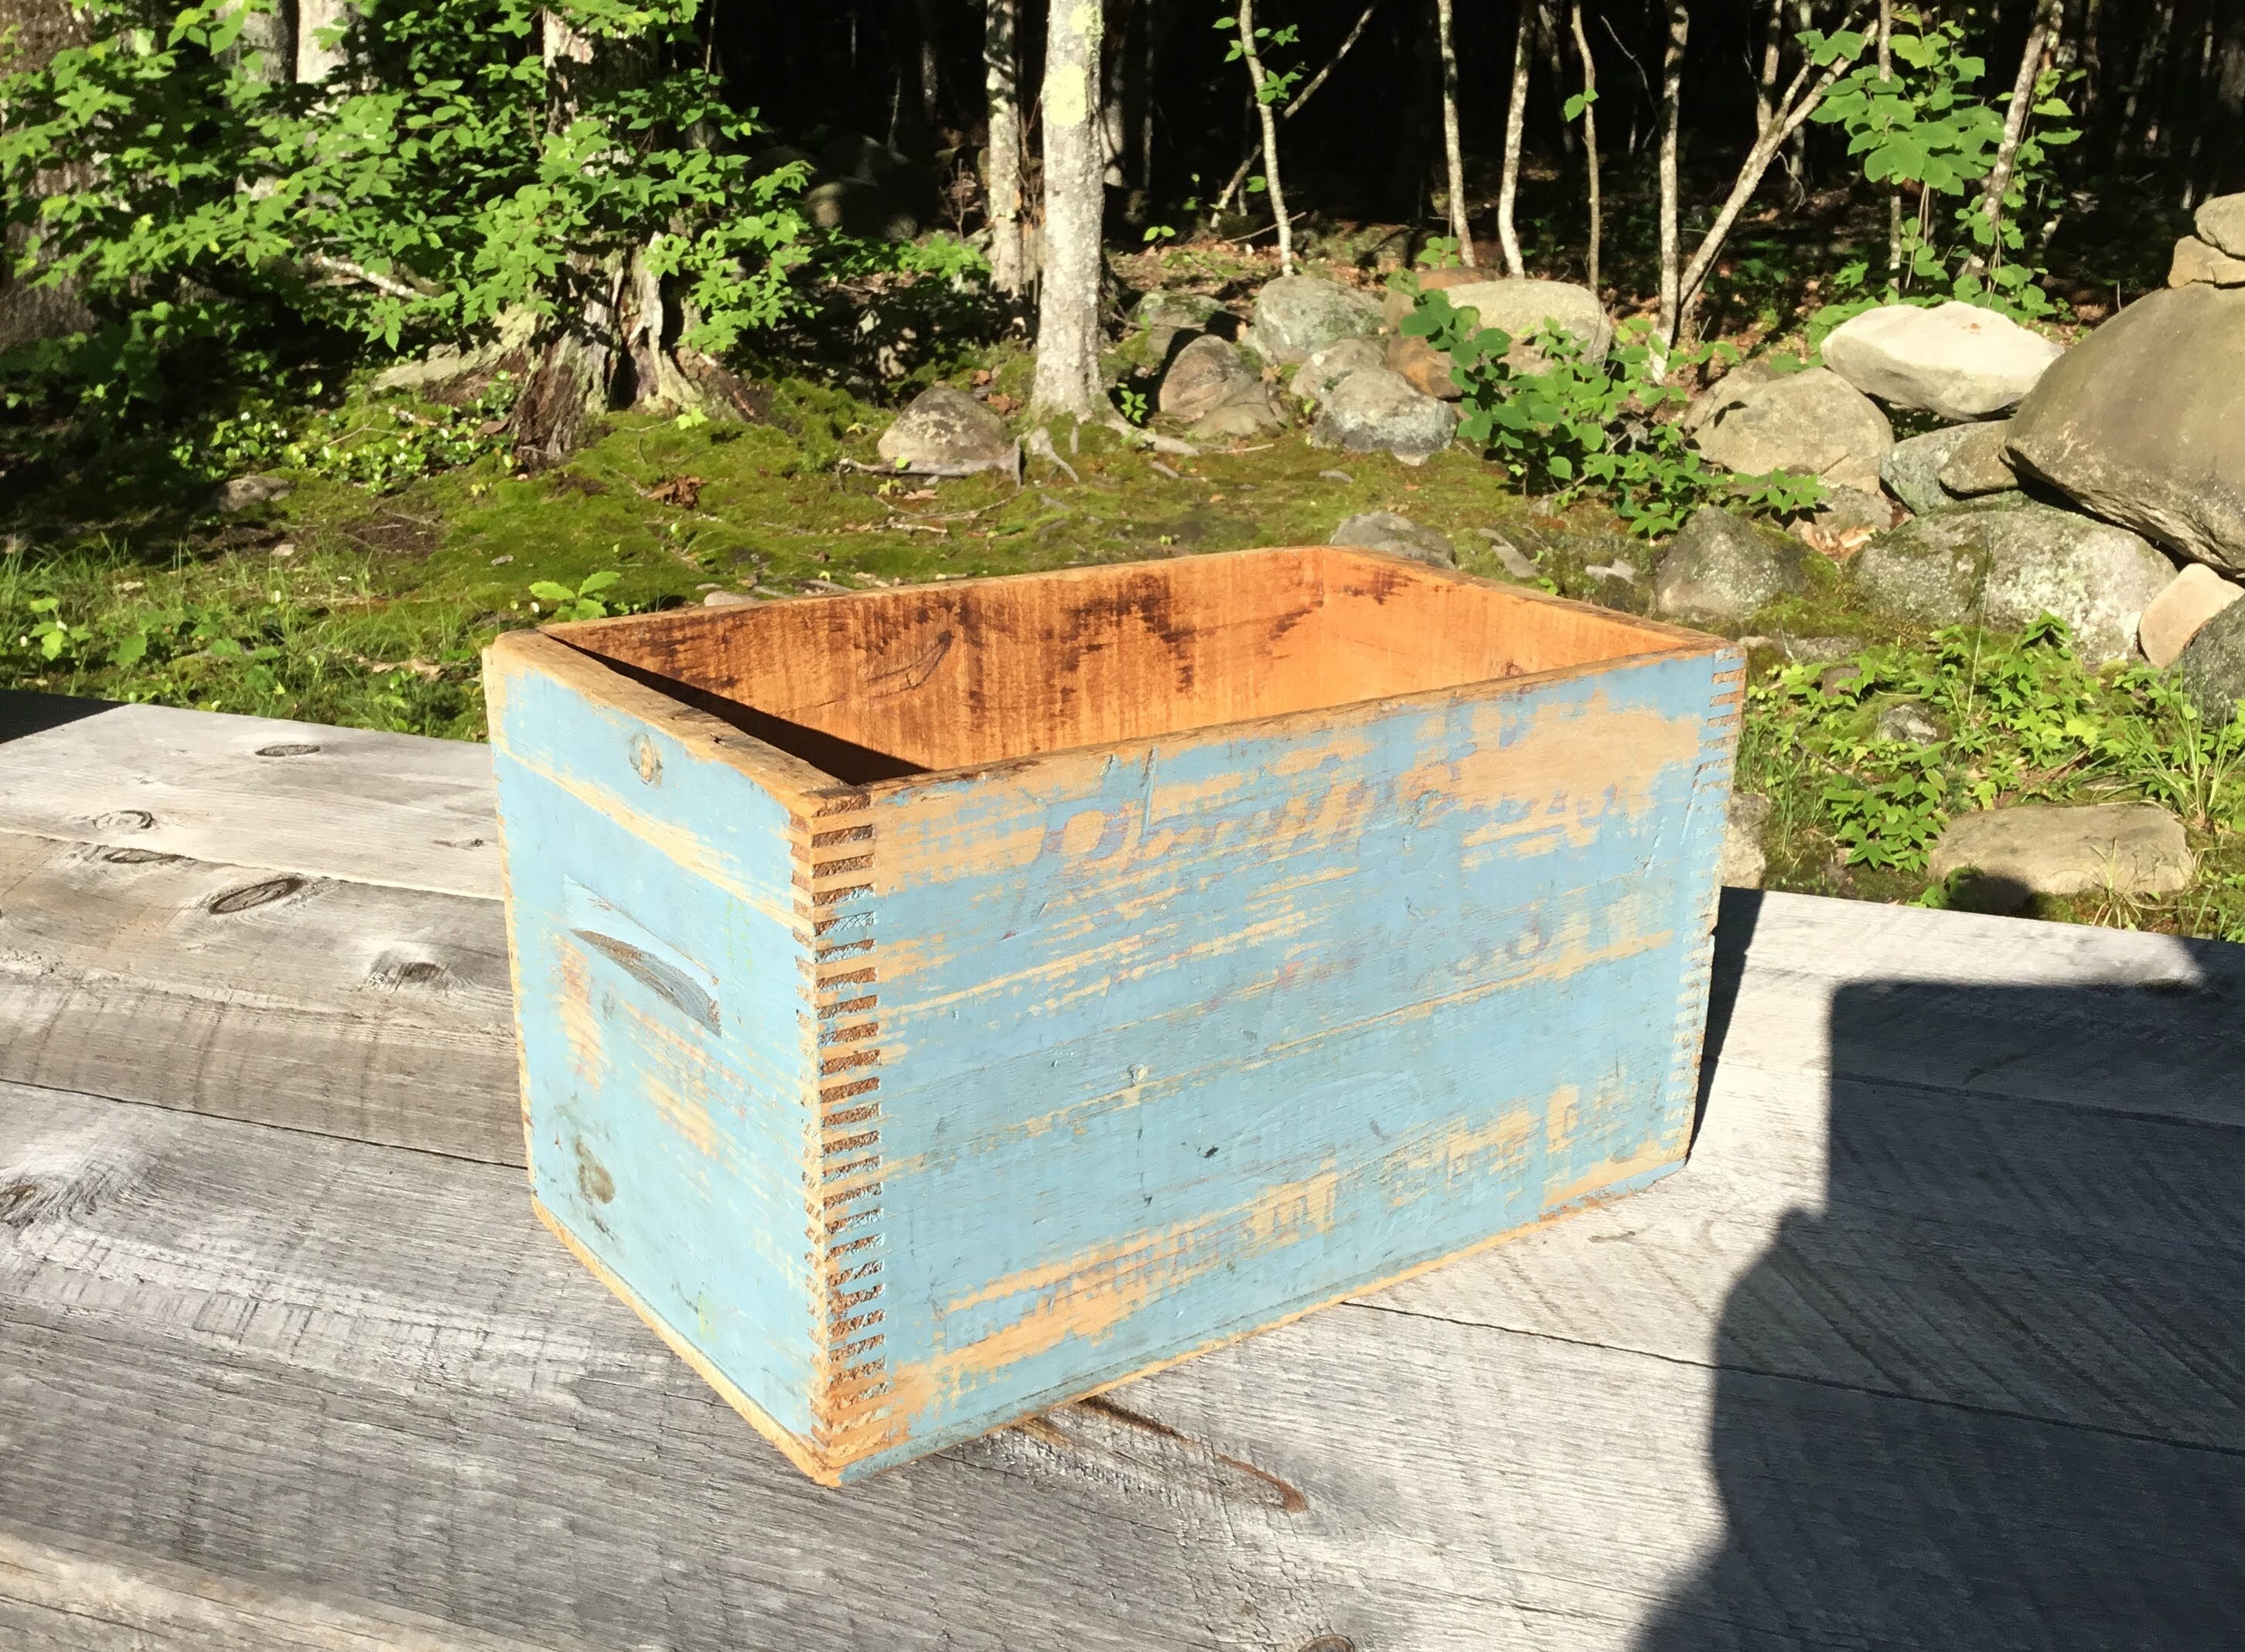 Vintage wooden military crate, Soviet Union 1980